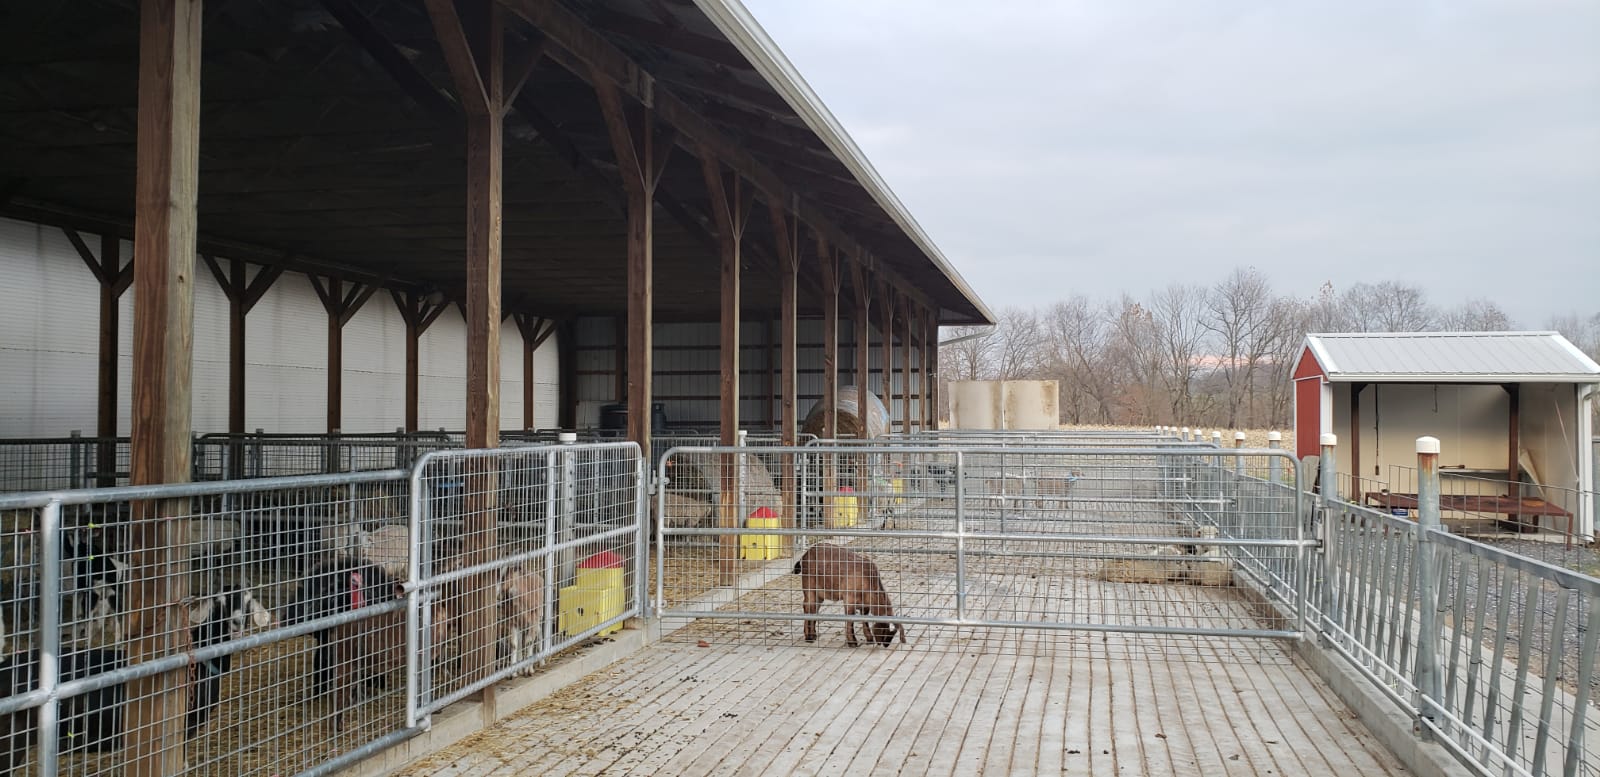 halal animals in the barn's fences